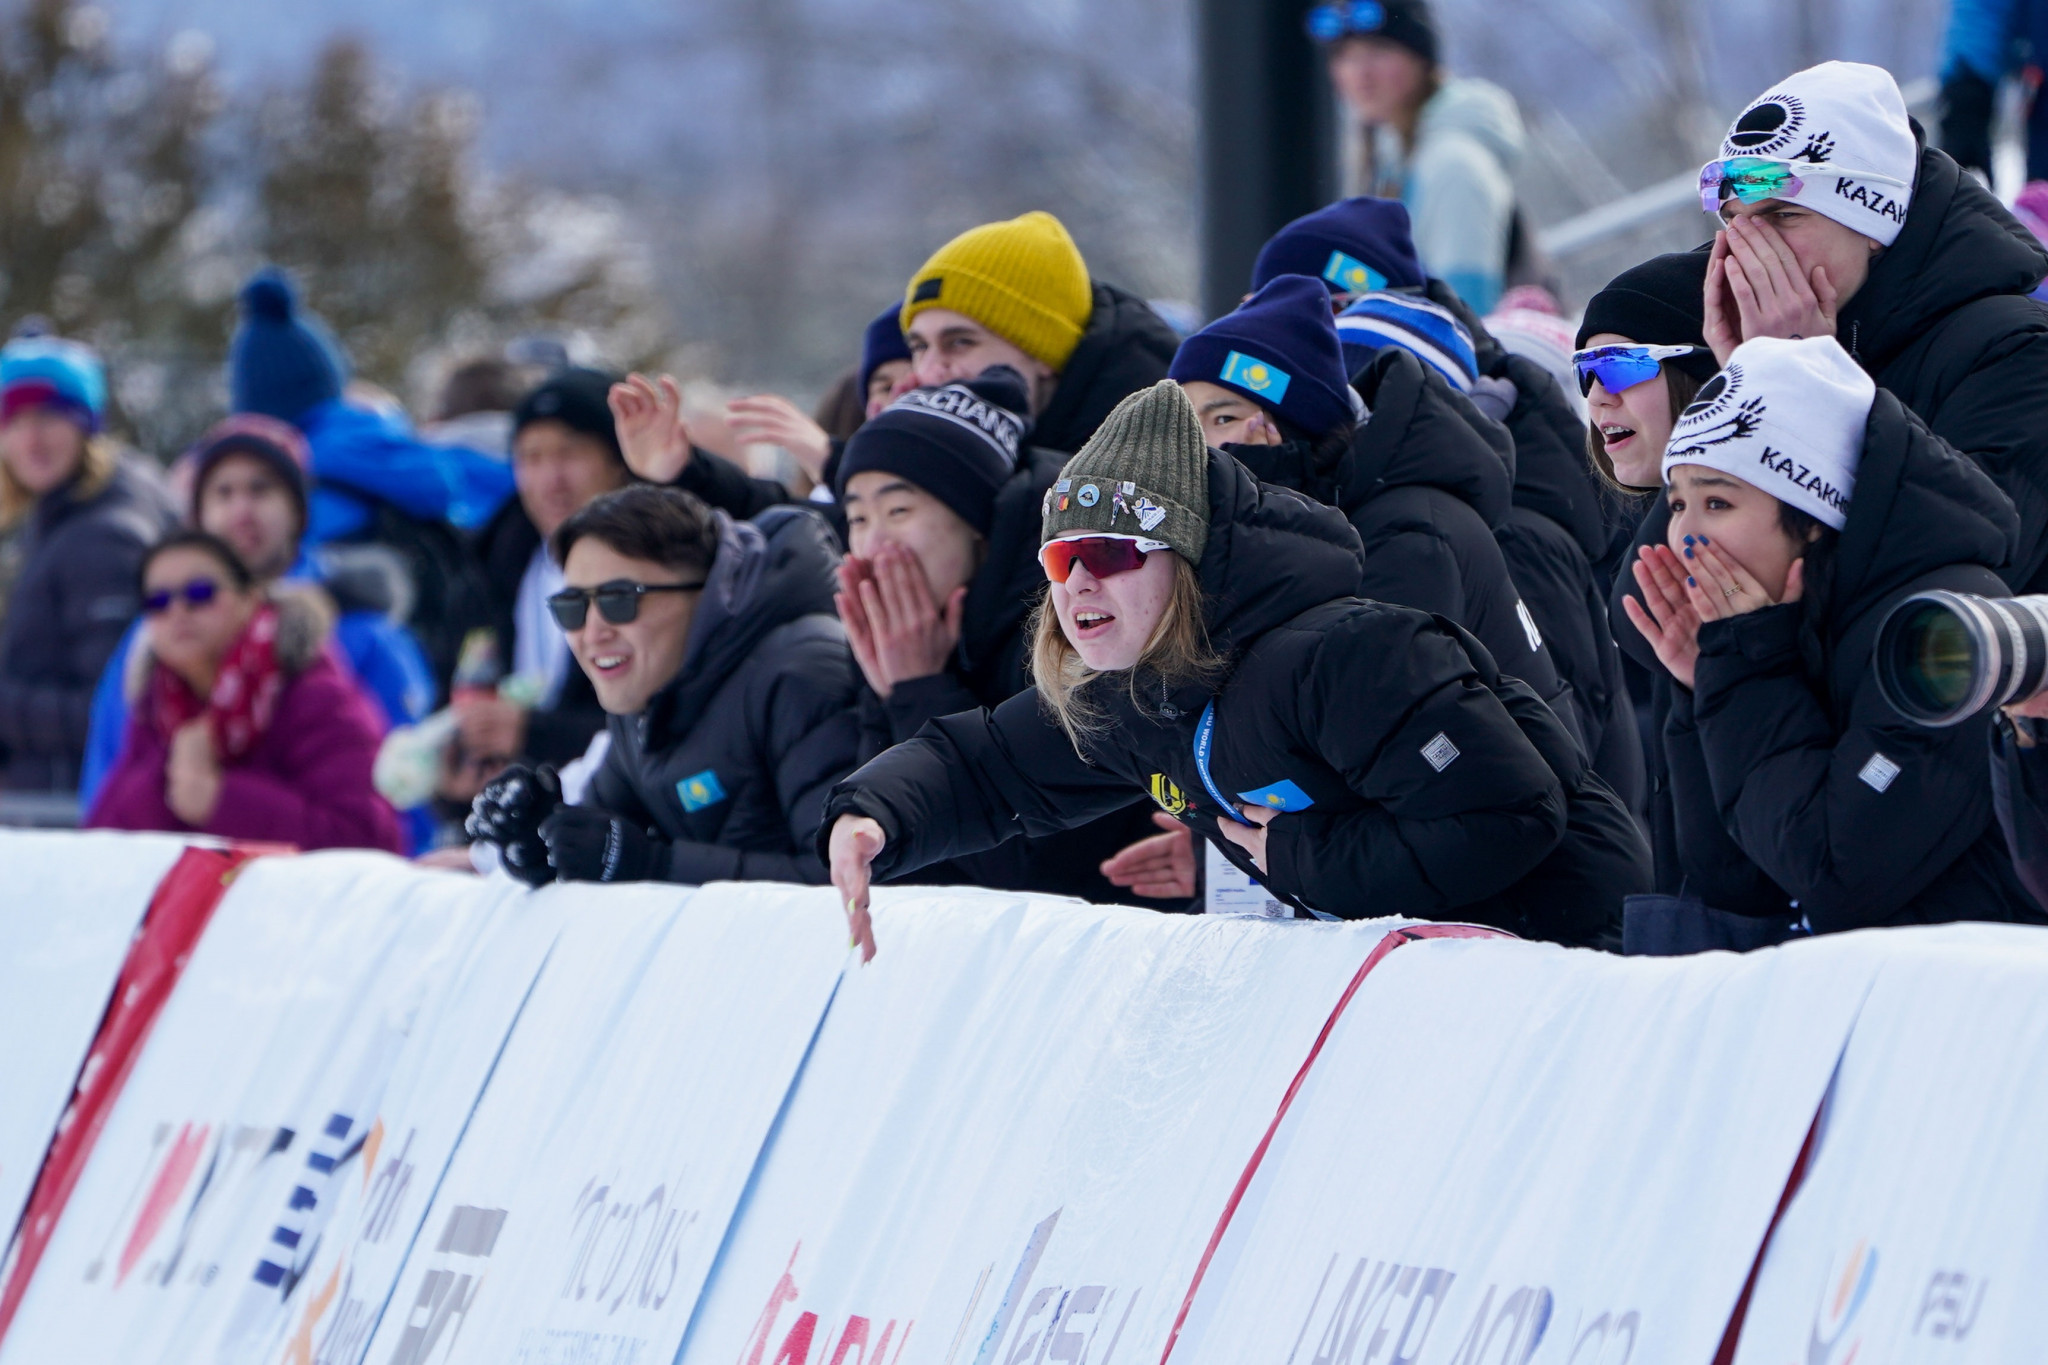 Fans flocked to the Olympic Speed Skating Oval on Martin Luther King Jr Day ©FISU